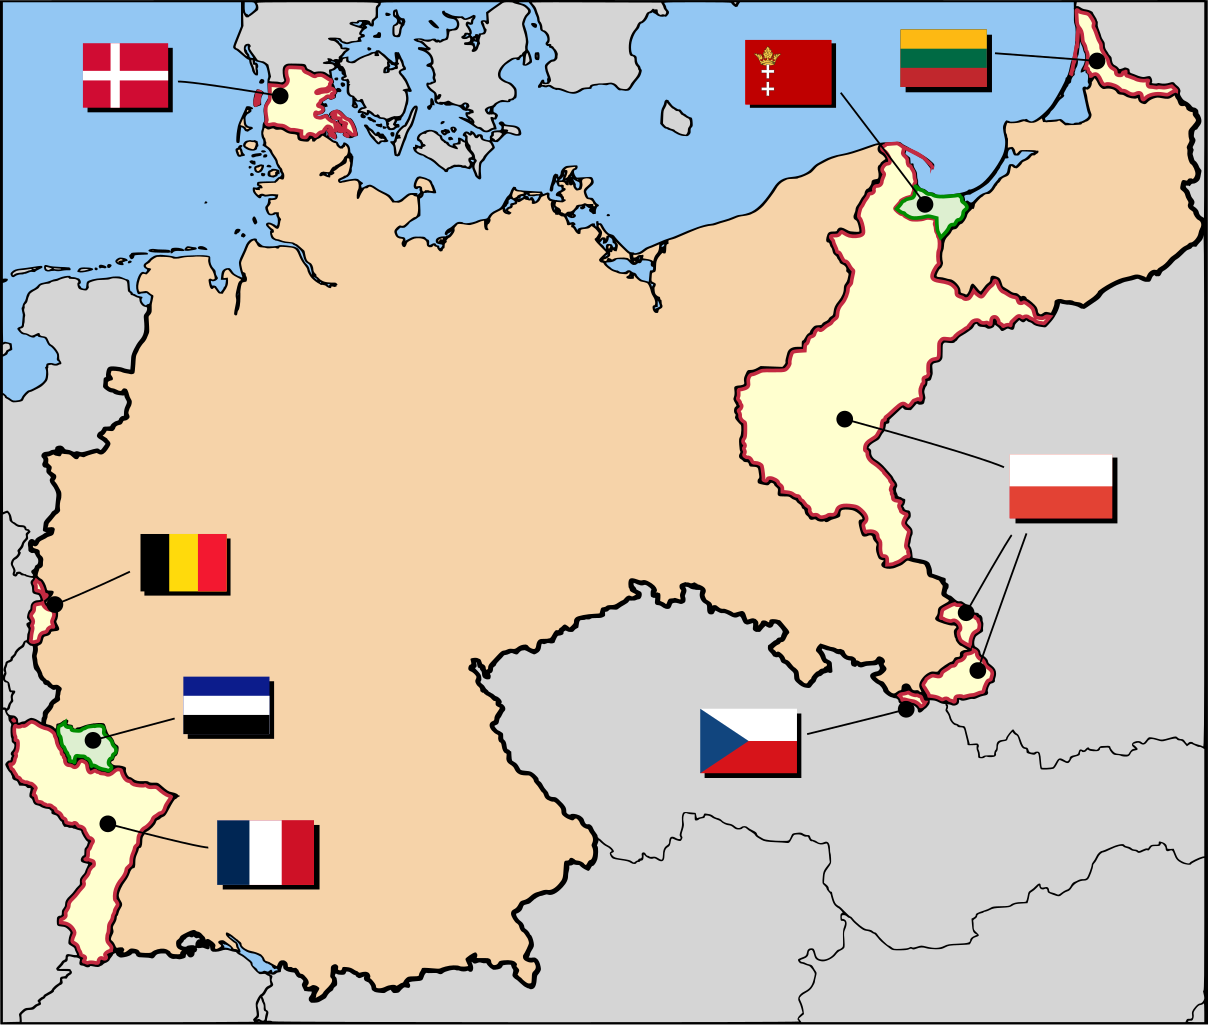 Map Of Germany After Ww1 File:German losses after WWI.svg   Wikimedia Commons